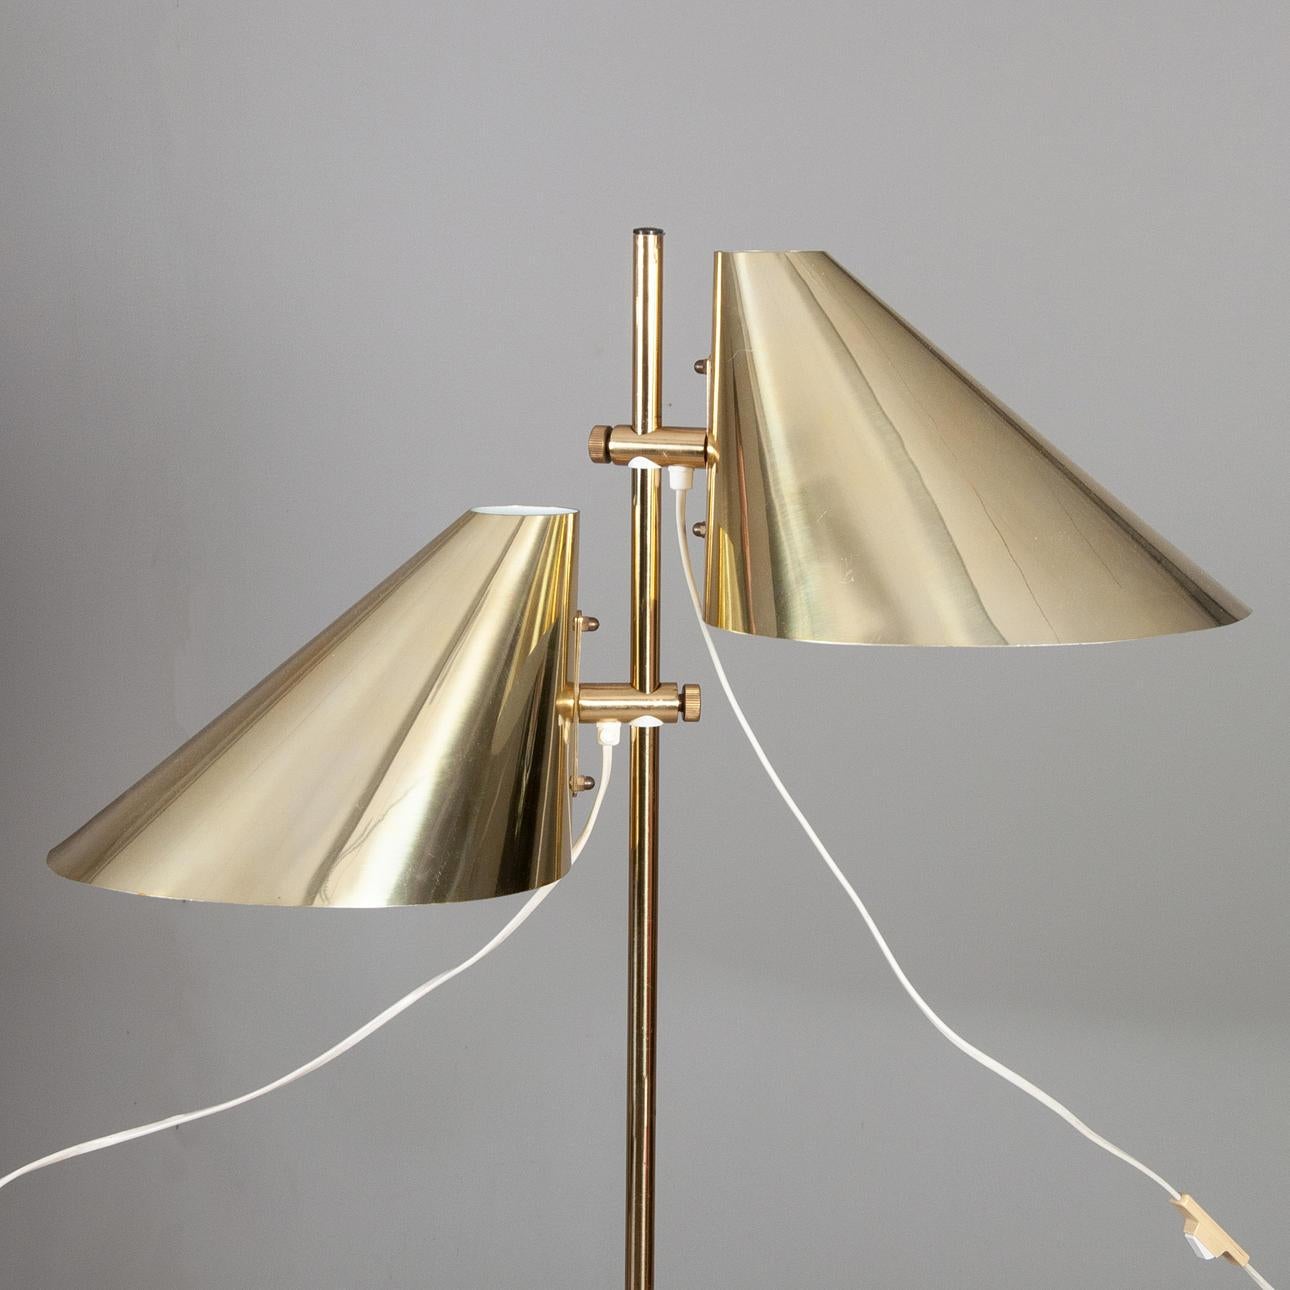 Chic and elegant, this floor lamp comes with a height adjustment system for the 2 lamps which allows aesthetic and refined lighting. Modern lamp produced in Sweden by Markaryd in the 1960s. Its brass structure gives it a lot of charm. H 152 cm